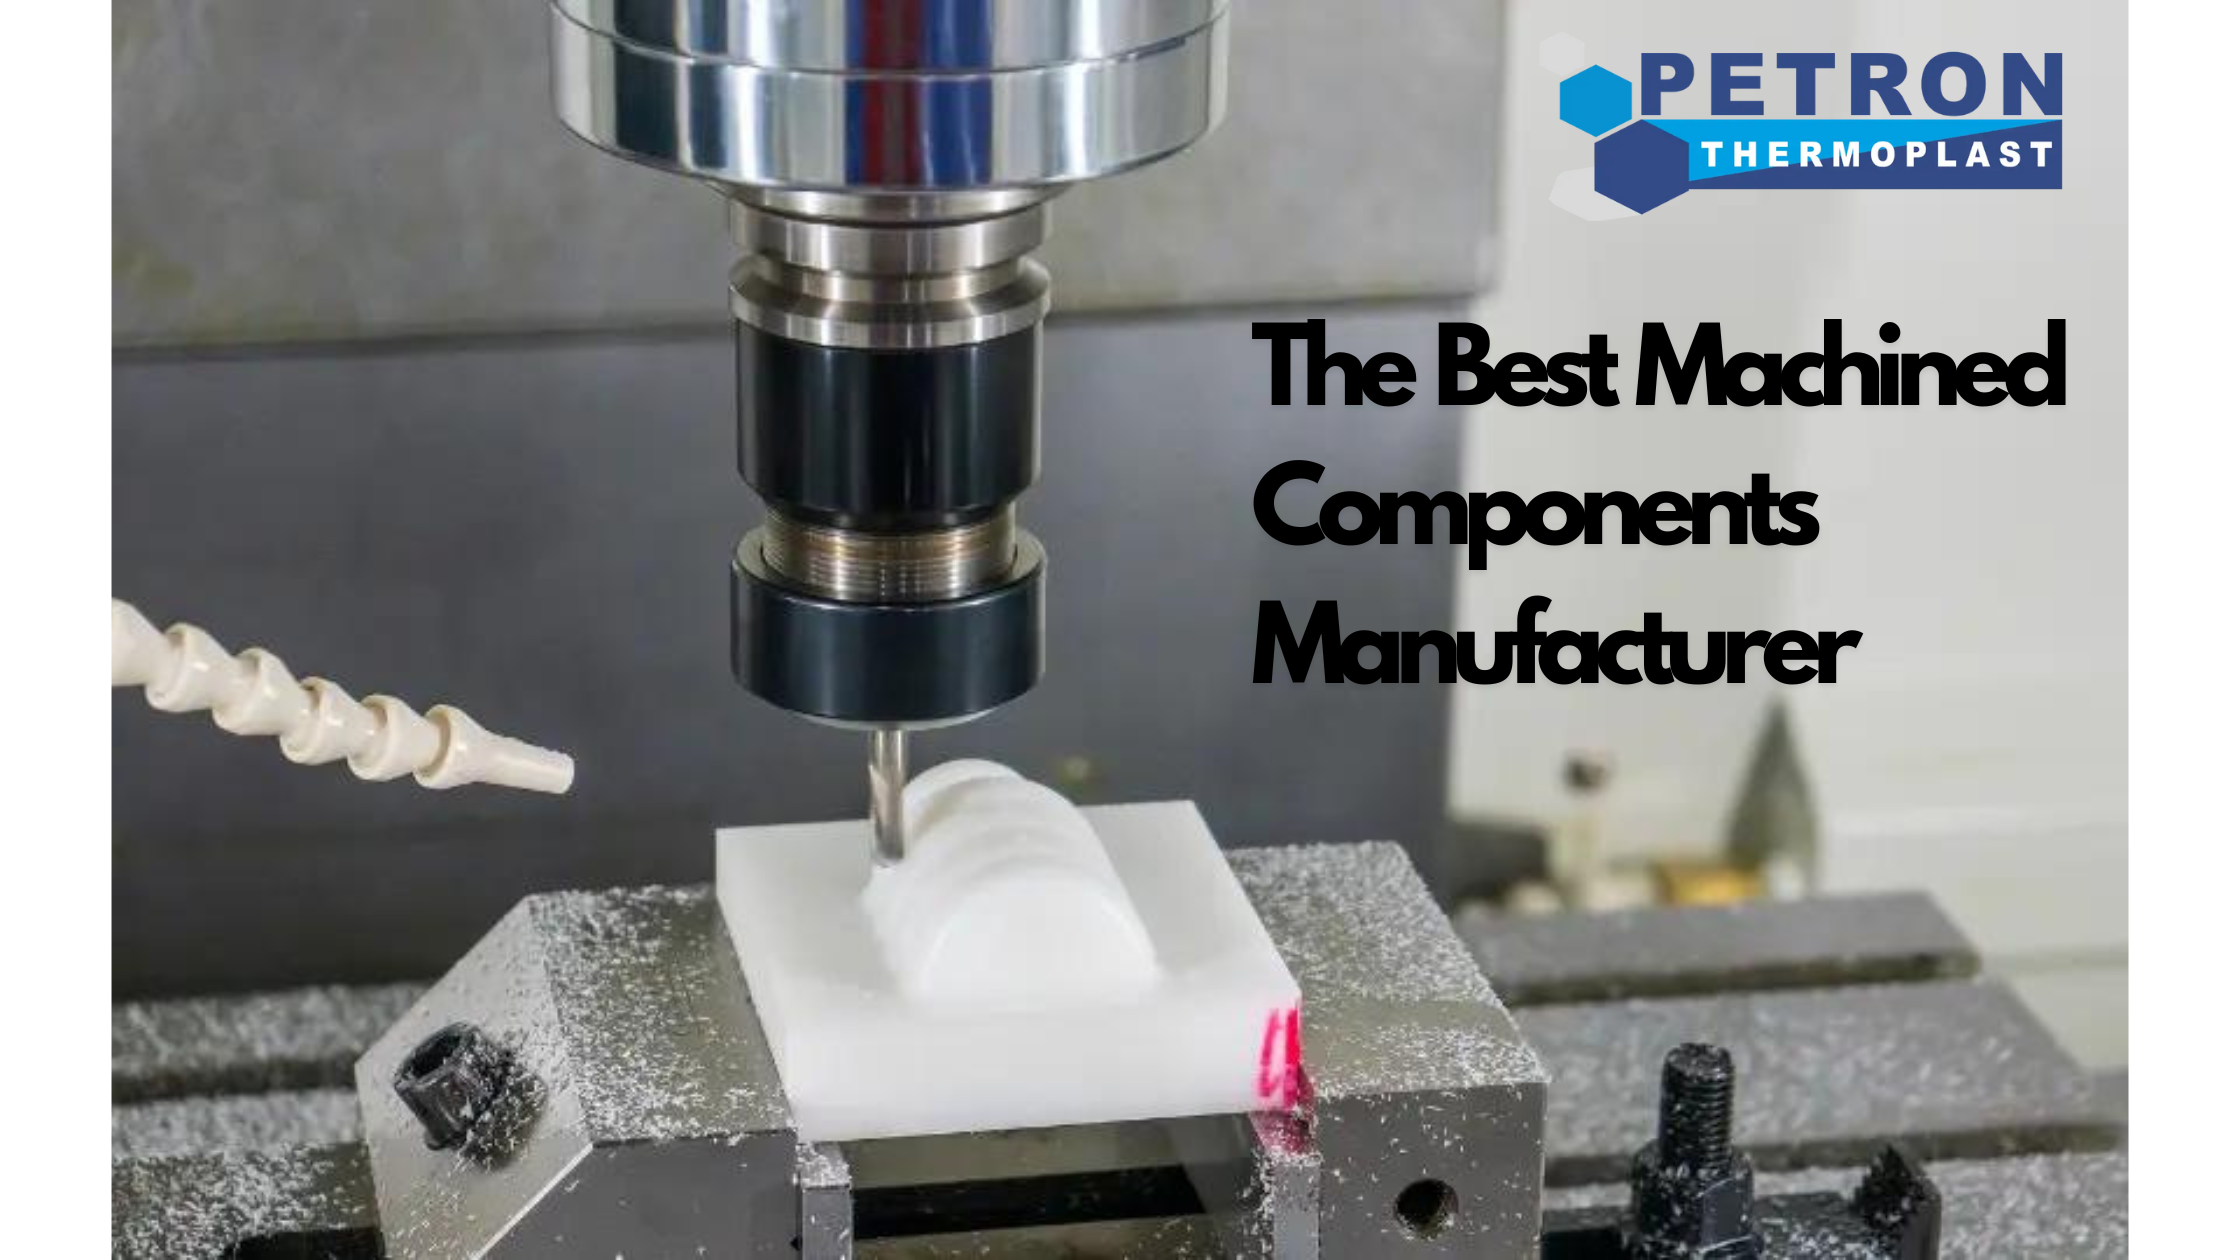 Petron Thermoplast - The Best Machined Components Manufacturer